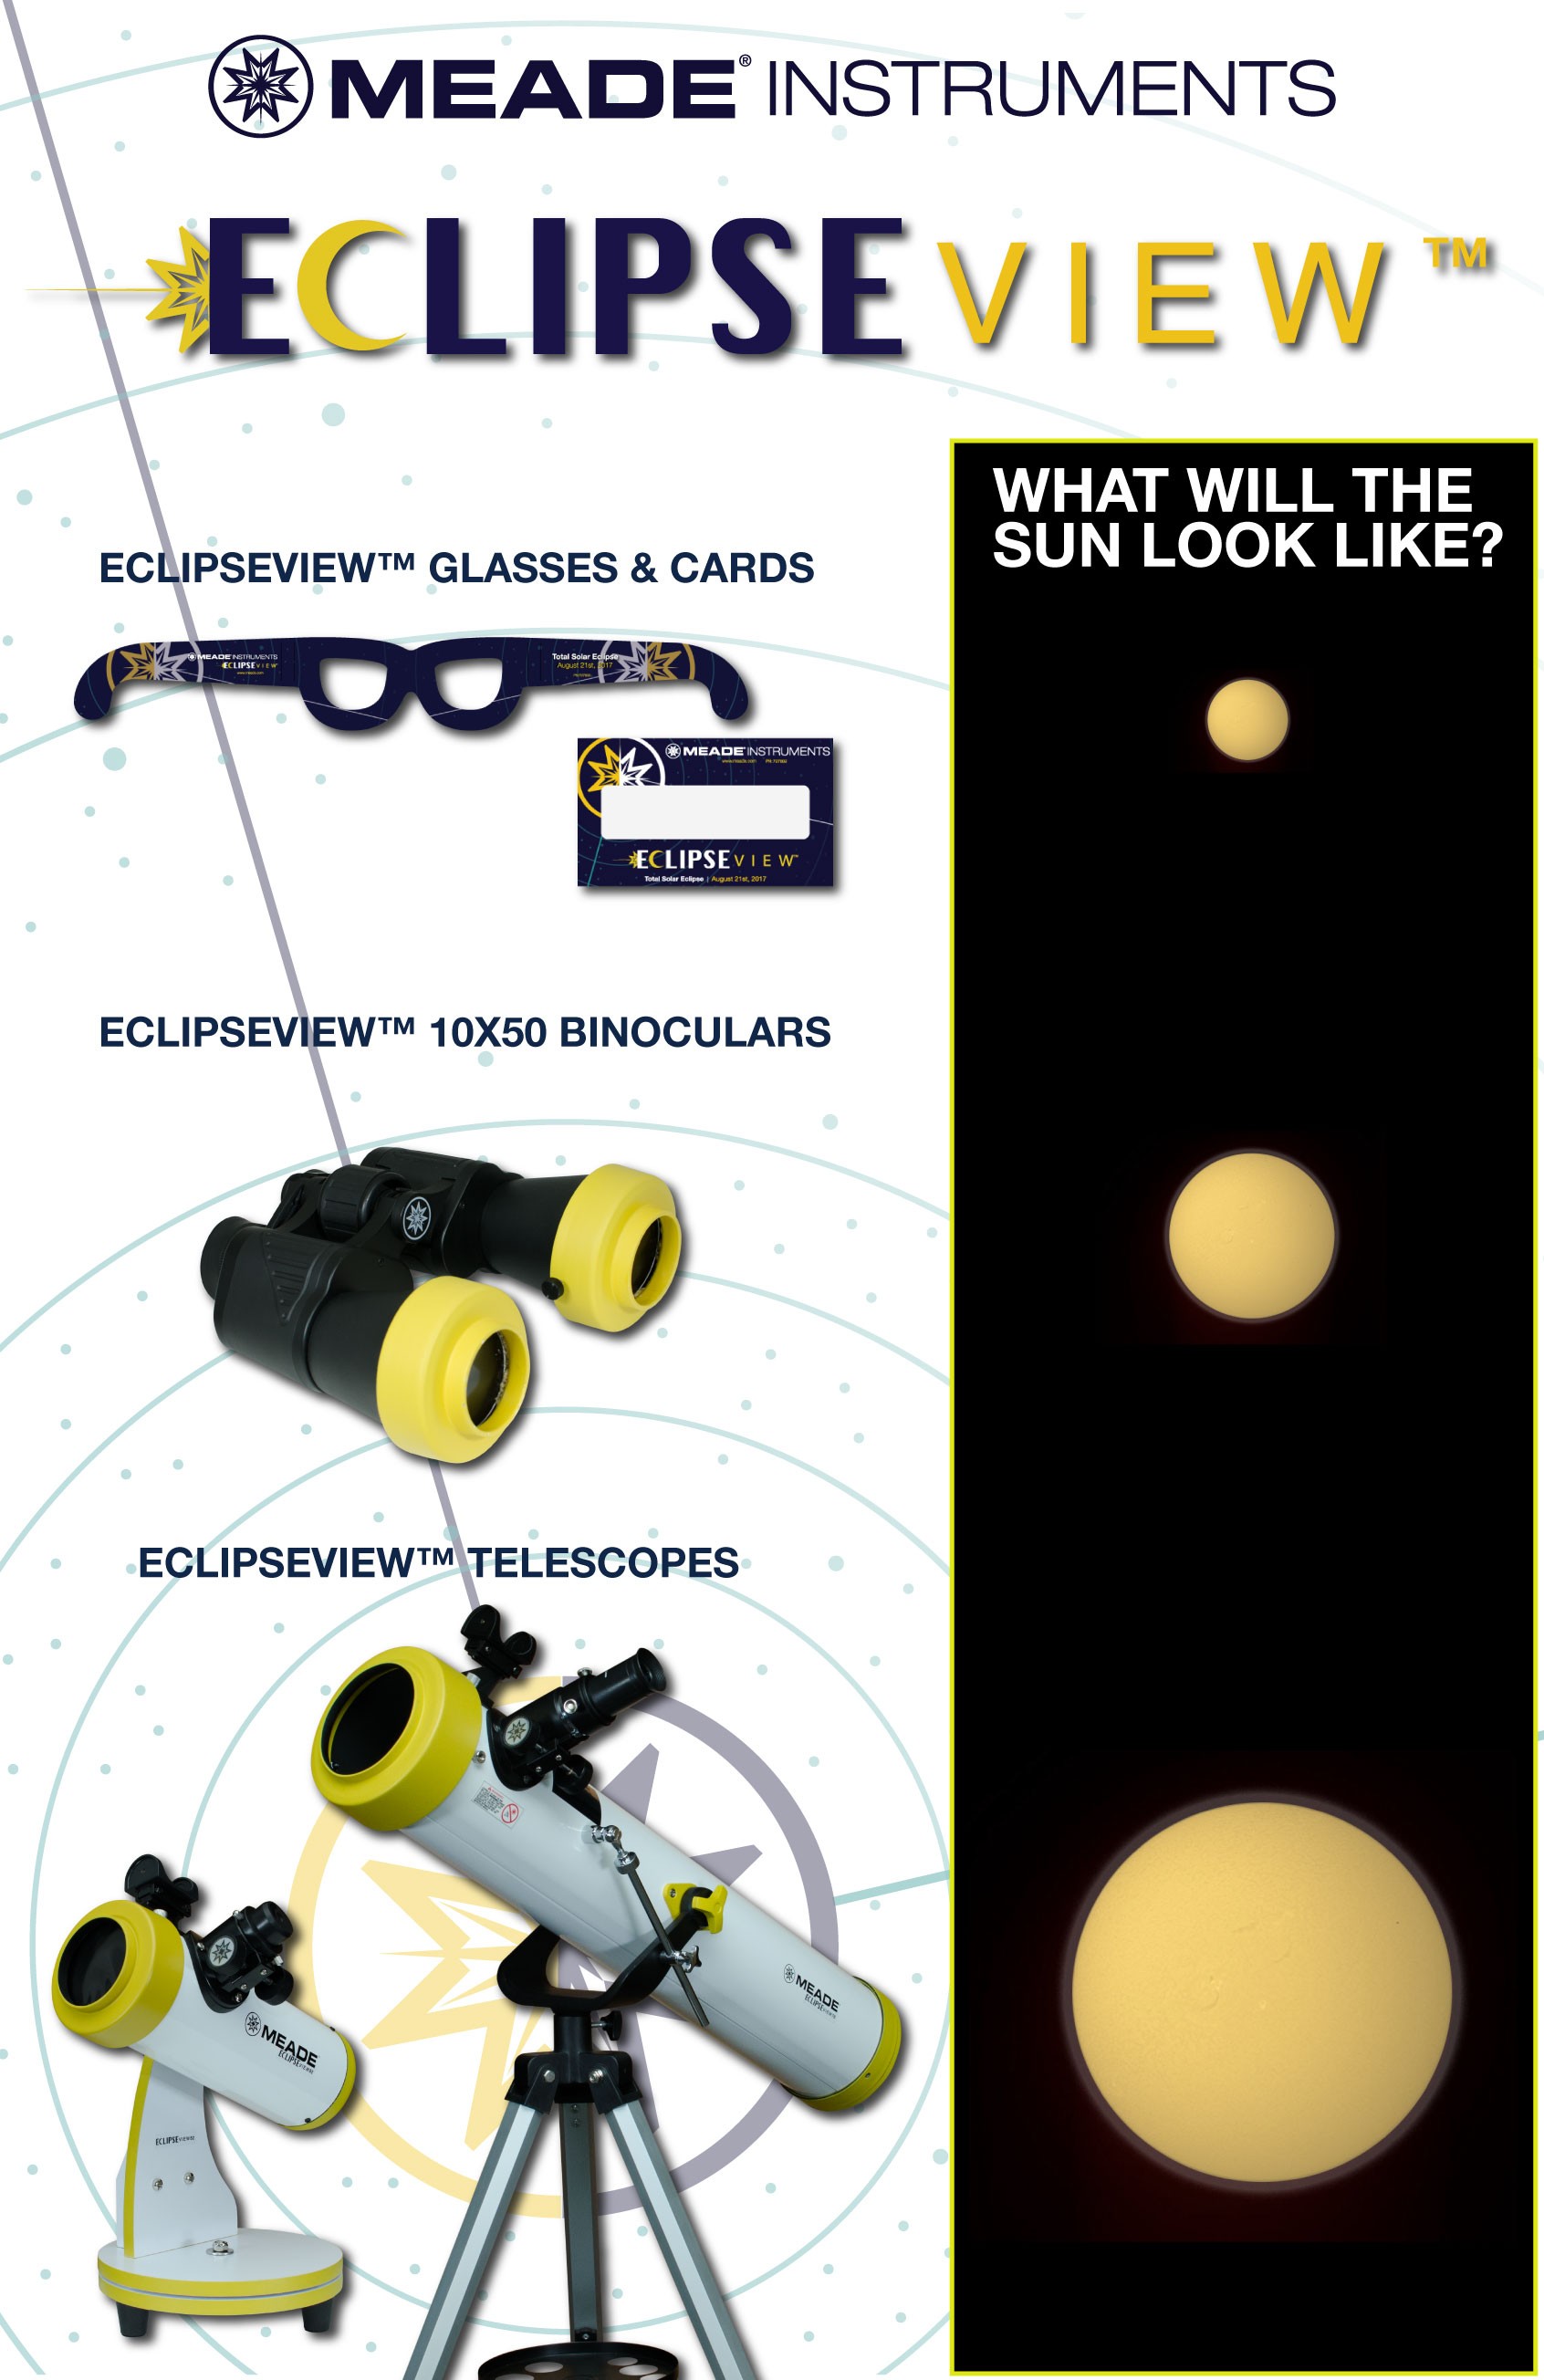 The telescope enlarges the image of the Sun.